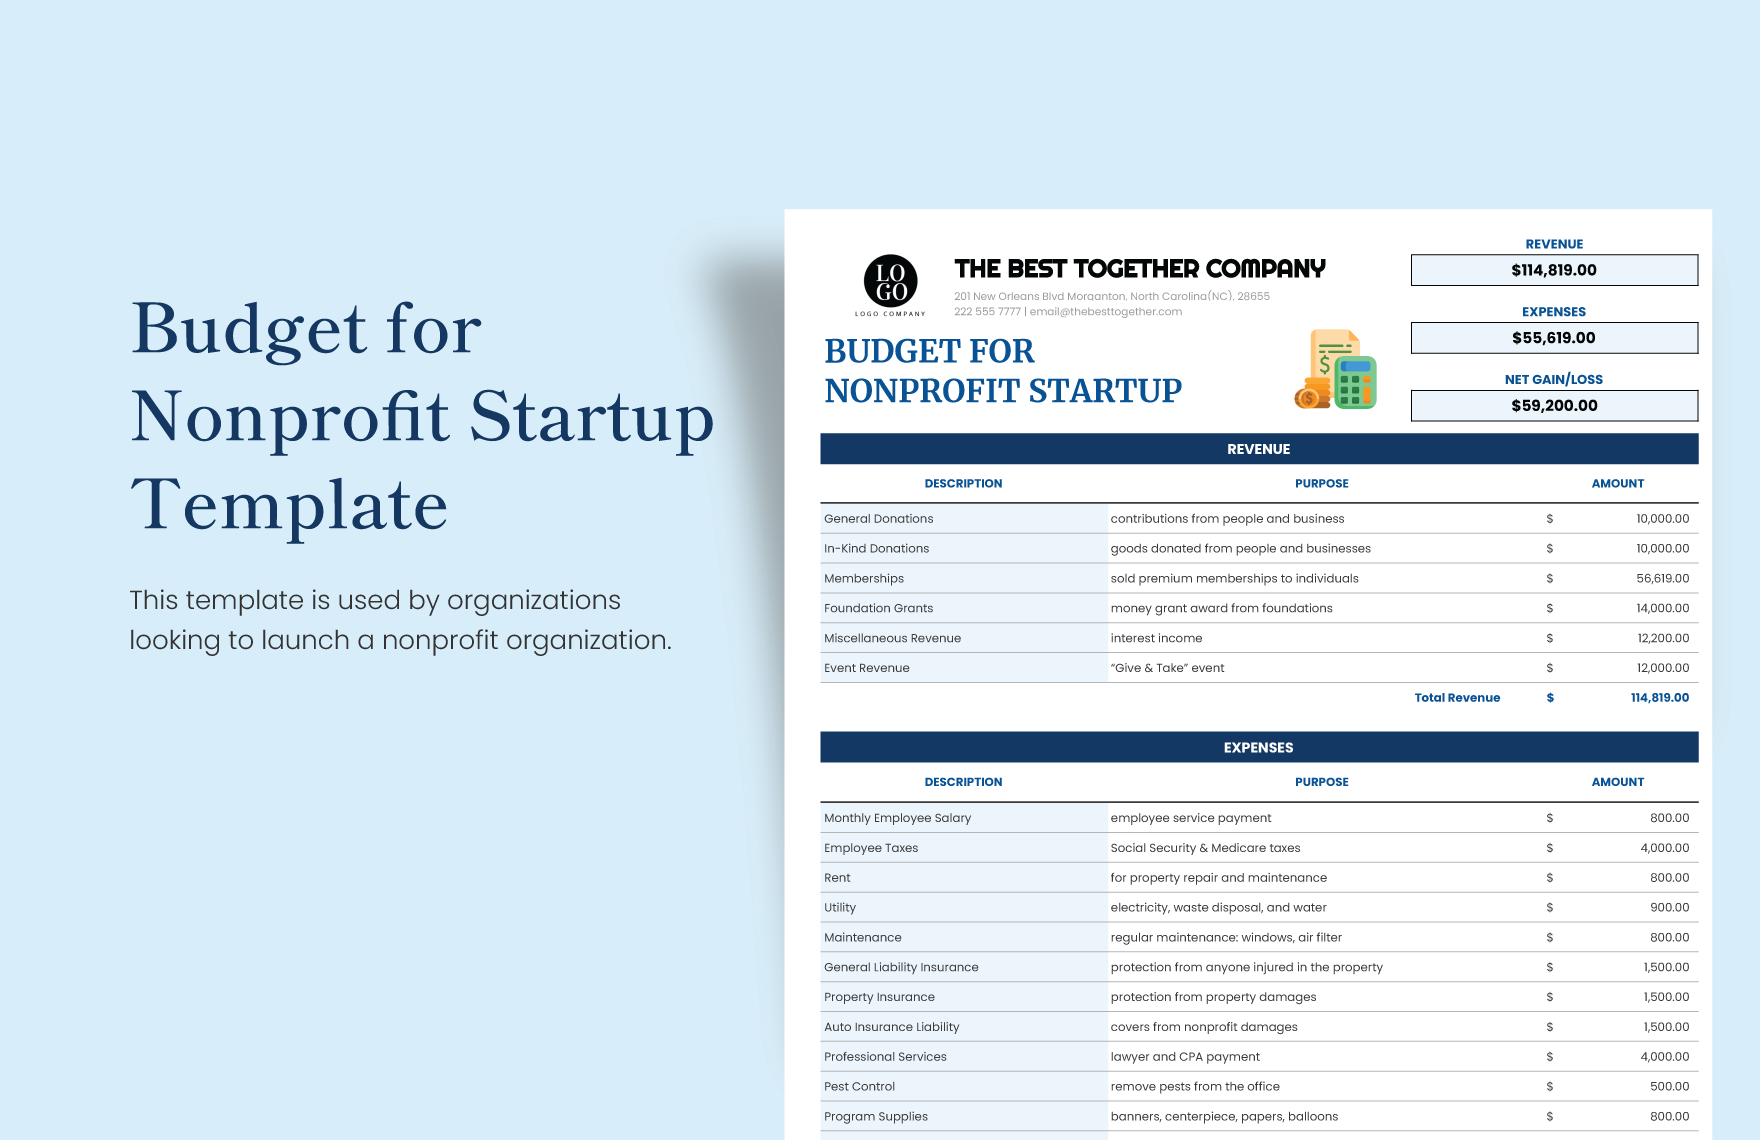 Budget for Nonprofit Startup Template